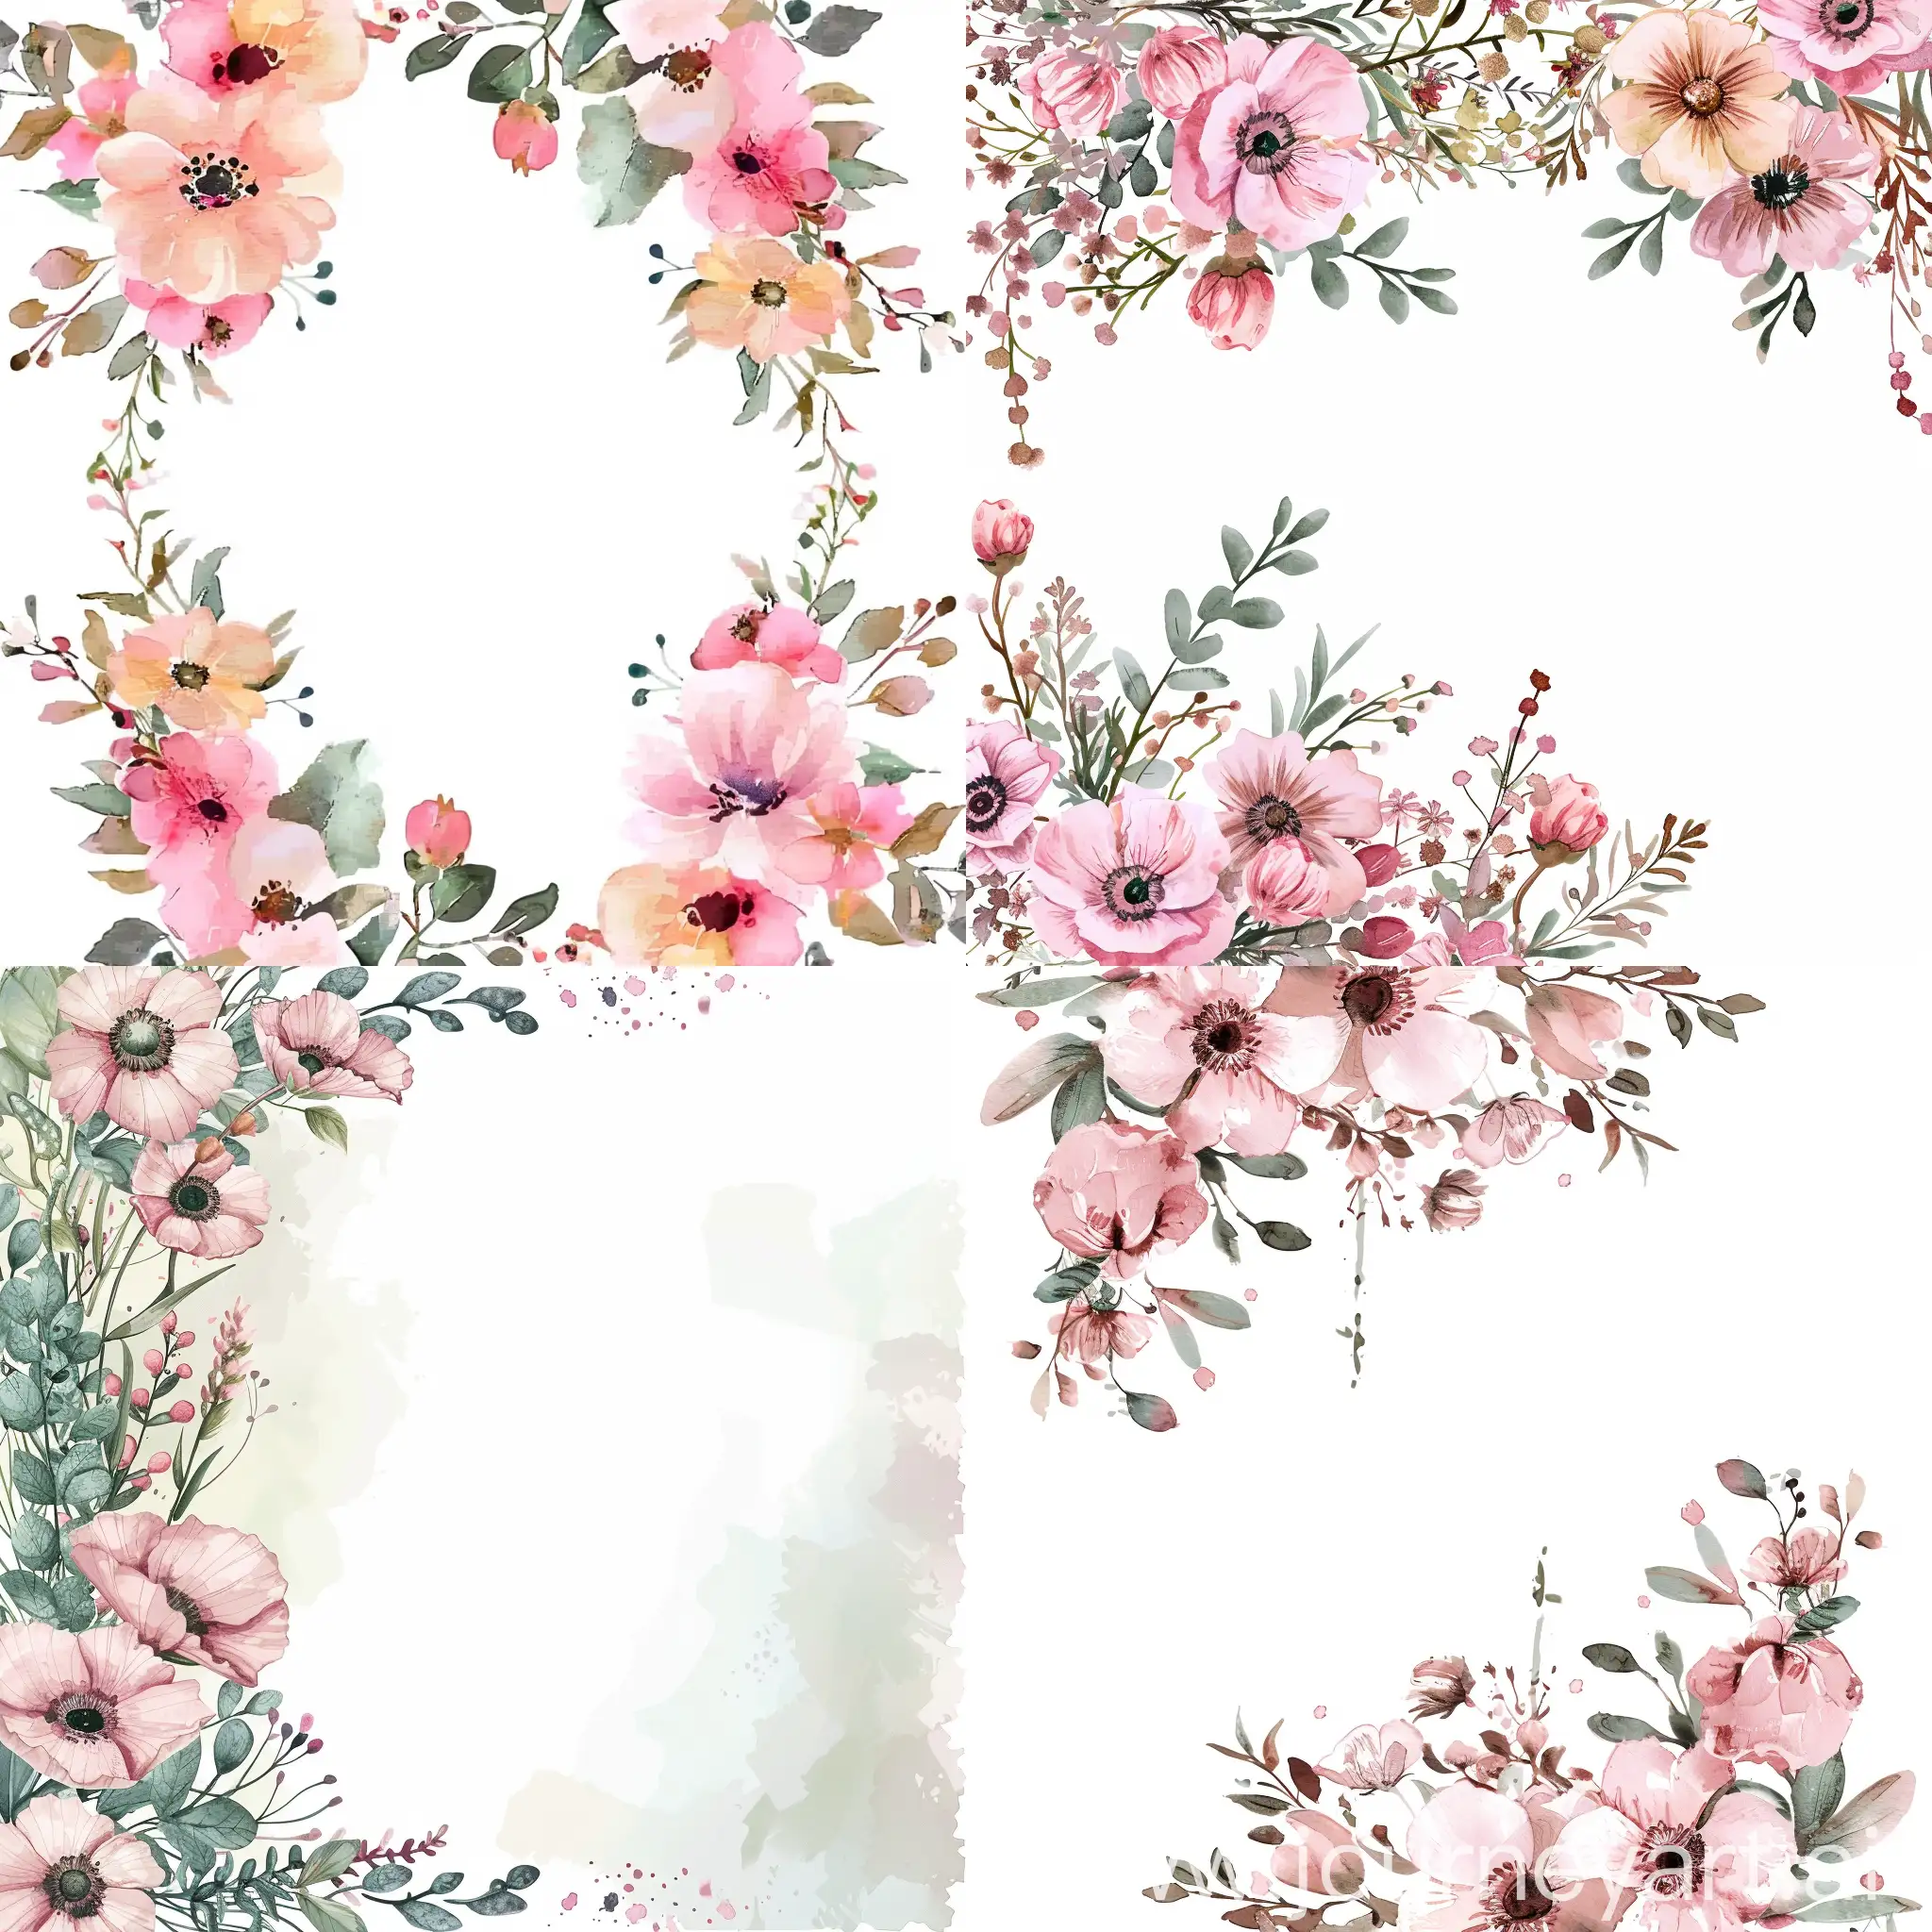 Watercolor floral border, soft pastel boho pink wildflowers bouquets for wedding invitation